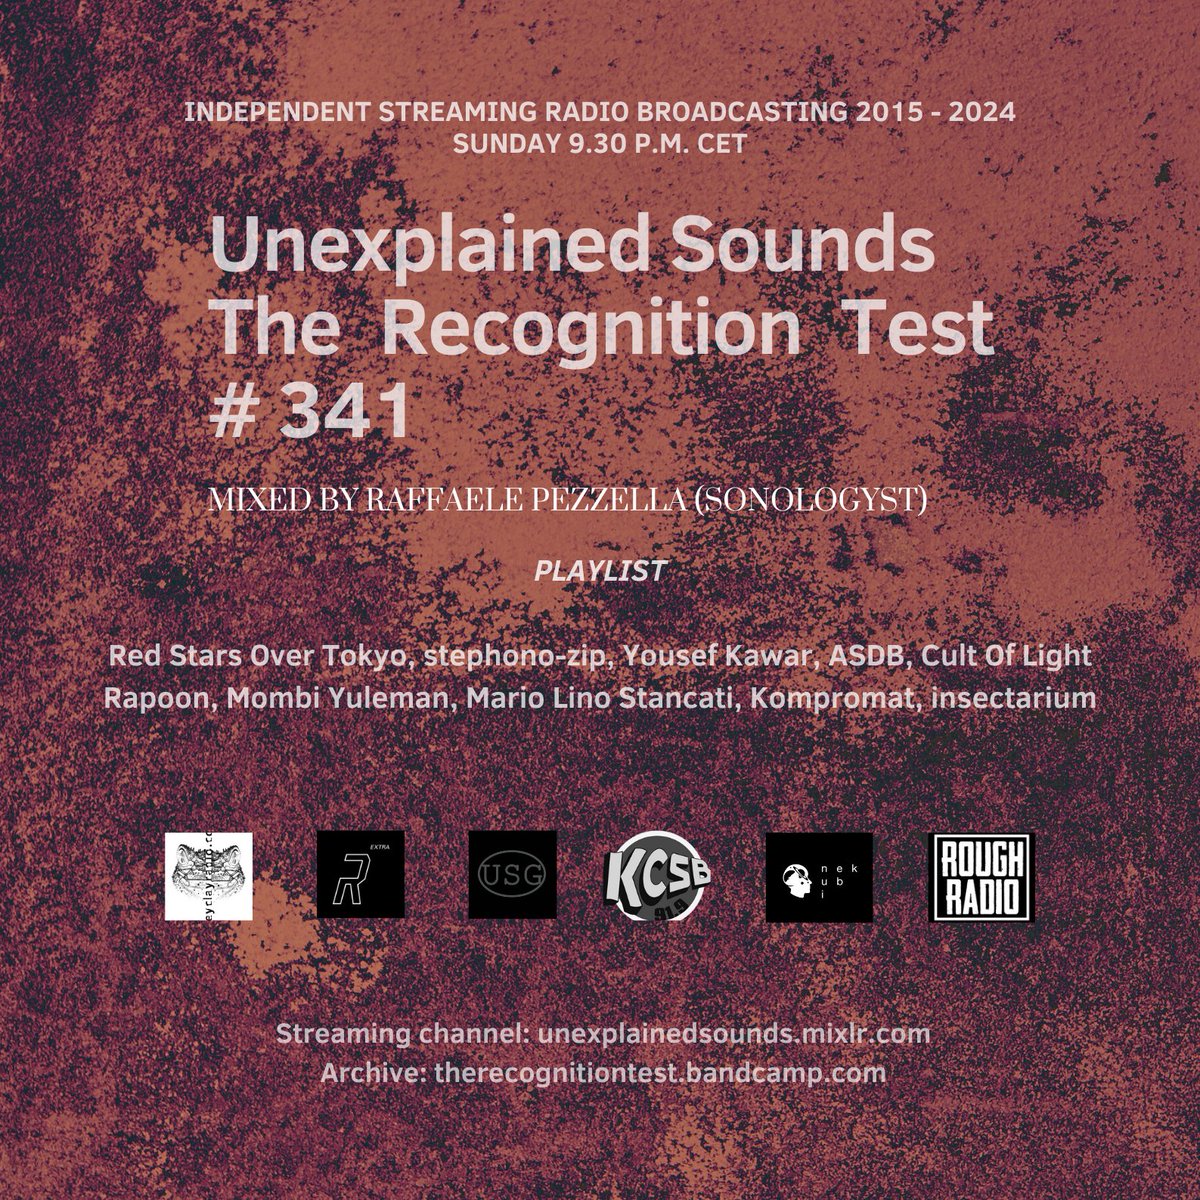 Sunday, May 5th 2024. H 9.30 P.M. CET Unexplained Sounds radio transmission, The Recognition Test # 341. Mixed by Raffaele Pezzella (a.k.a. Sonologyst). Streaming: unexplainedsounds.mixlr.com